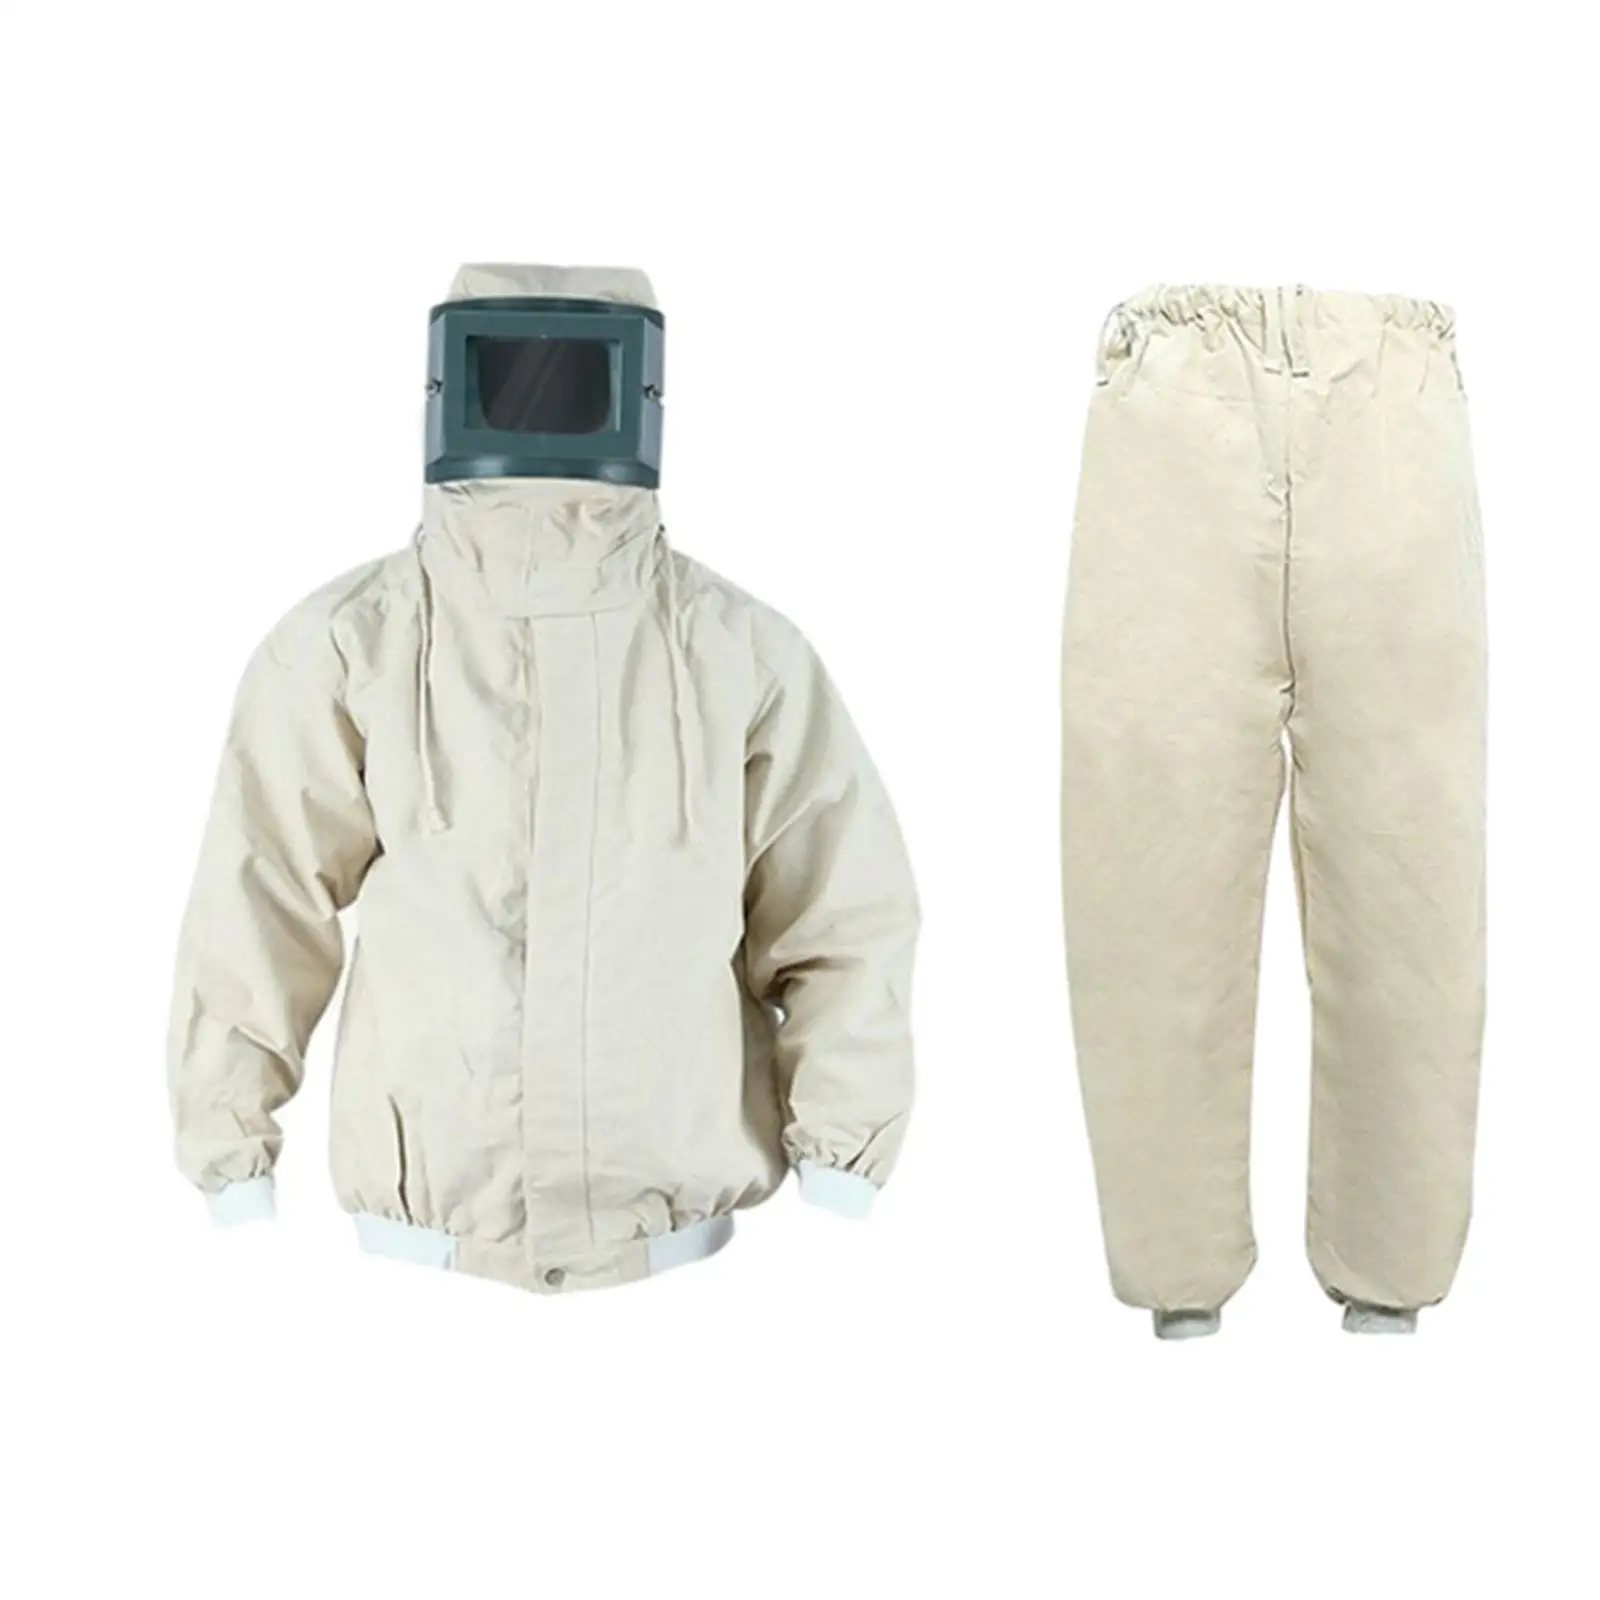 Extra Large Sandblasting Clothing Breathable Safety Work Overalls Protective Coveralls for Shipbuilding Woodworking